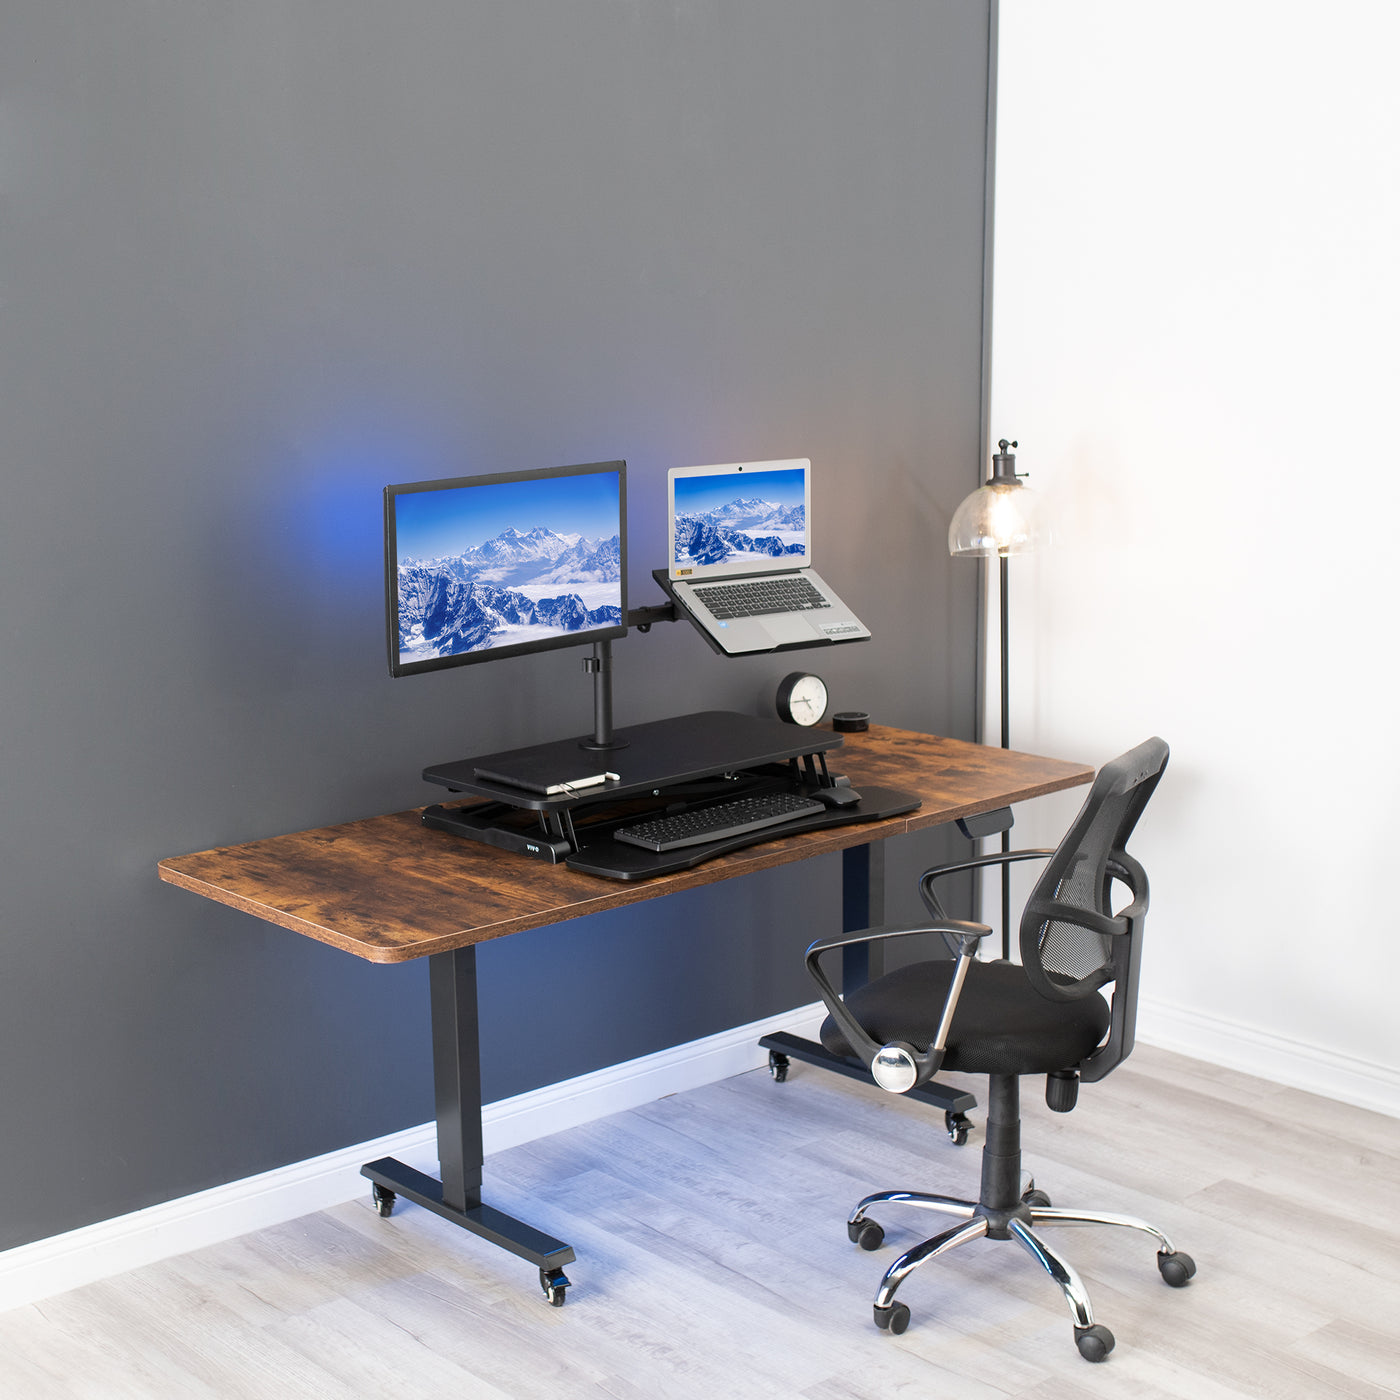 Desk riser with built-in monitor mount and laptop stand.